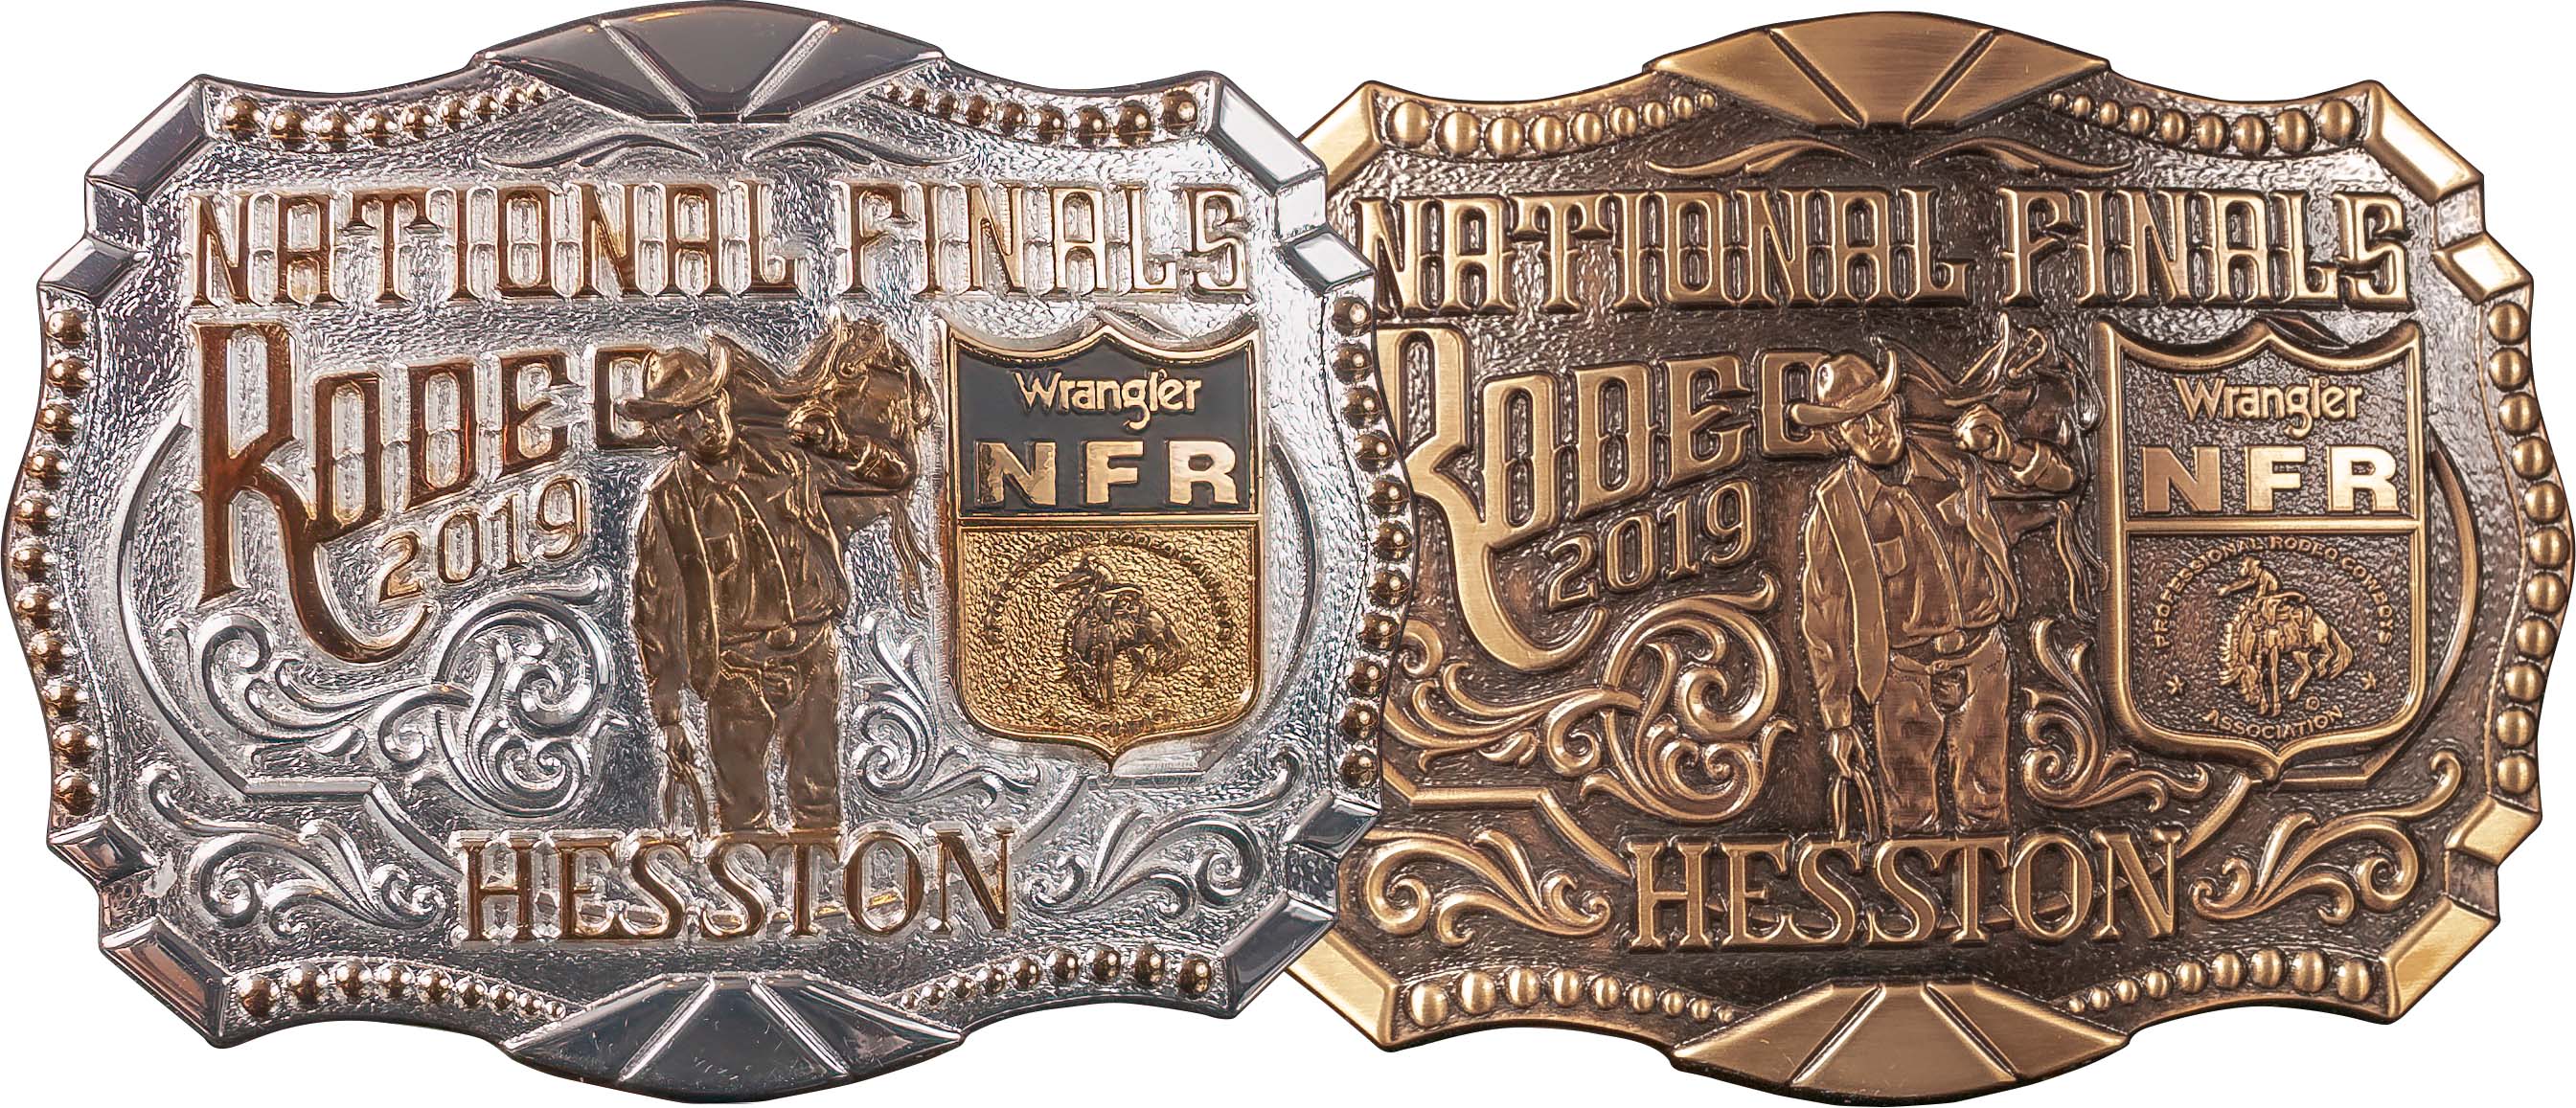 2012 Hesston National Finals Rodeo Large Belt Buckle 